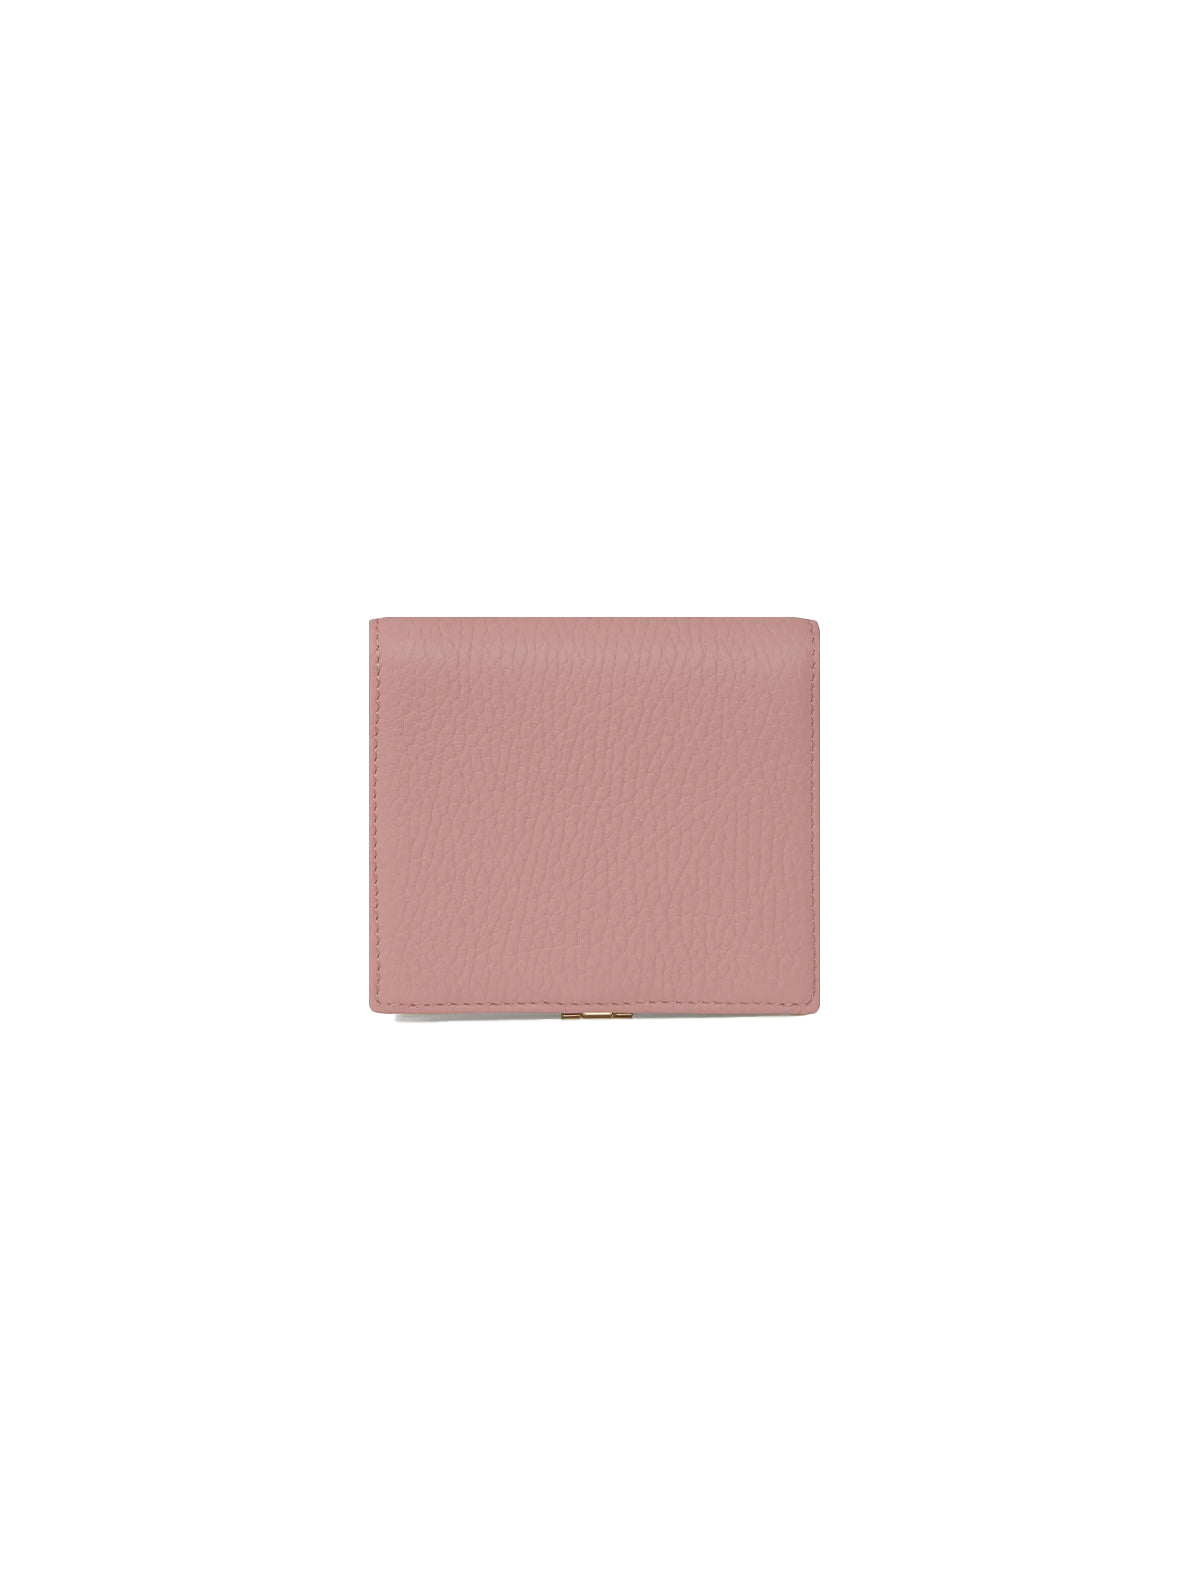 STRATHBERRY Crescent Wallet in Grain Leather Blush Rose